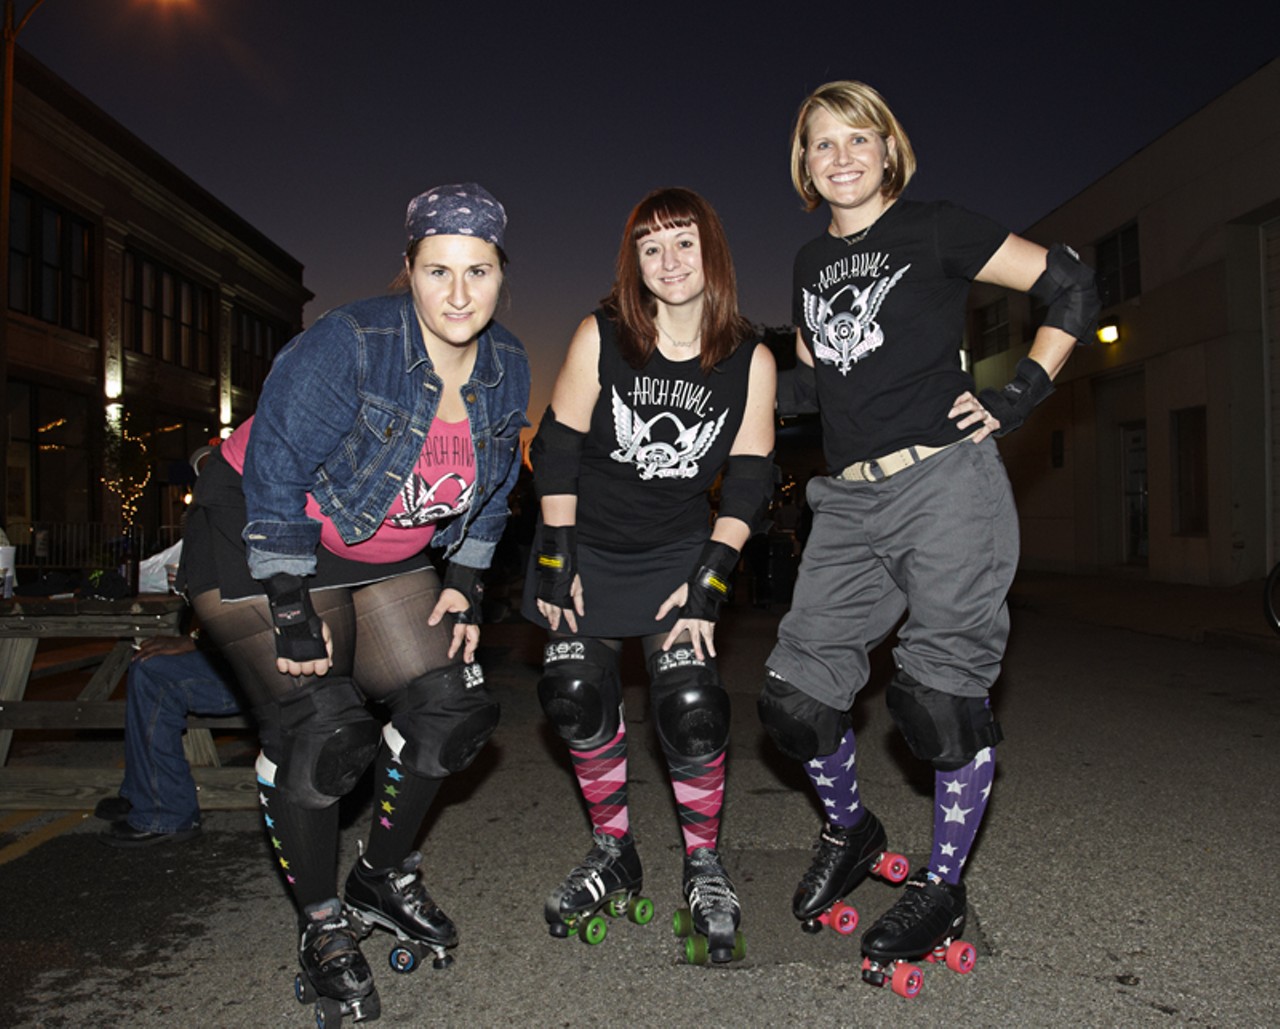 The Arch Rival Roller Girls.